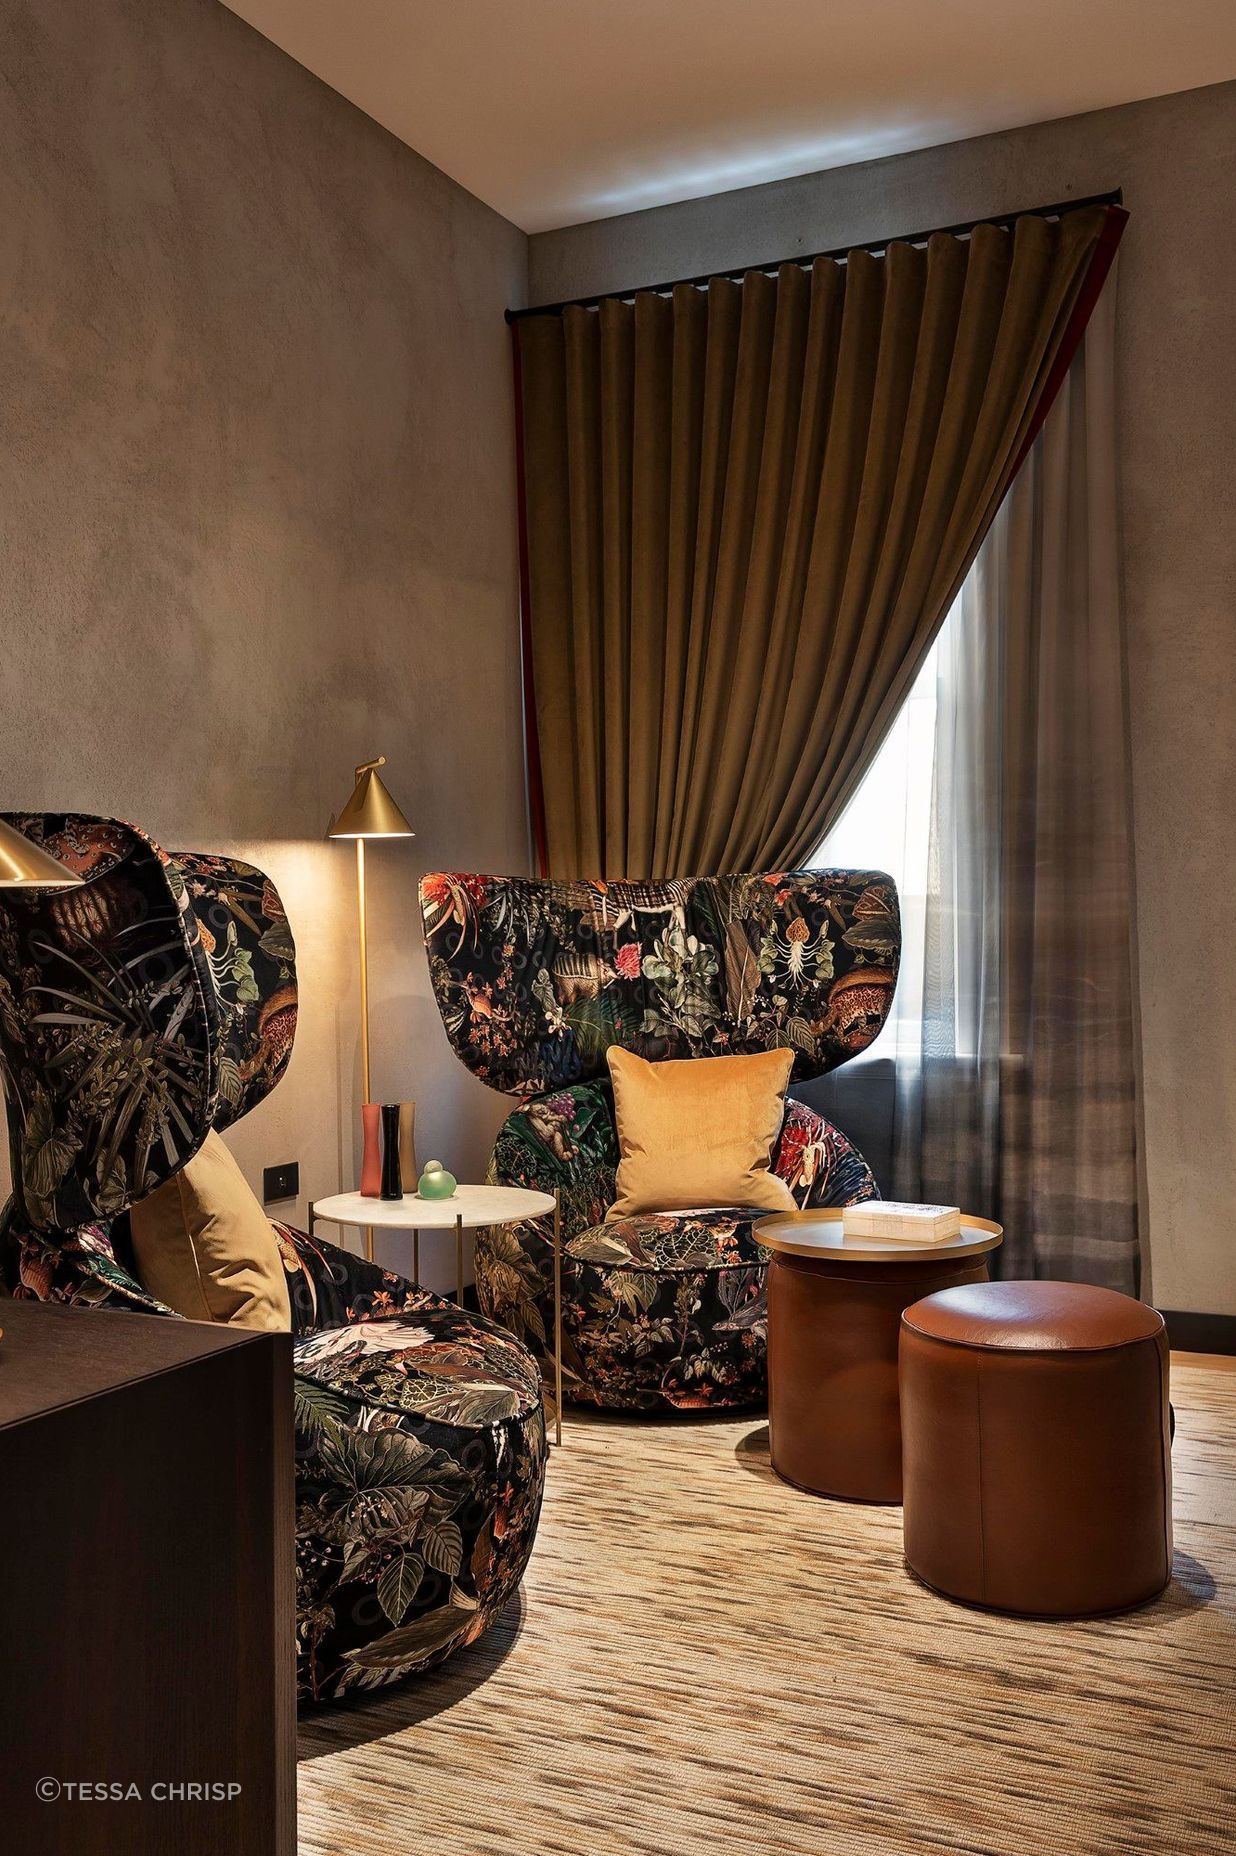 The waiting room features oversized Moooi chairs and leather ottomans for a relaxed and warm reception.